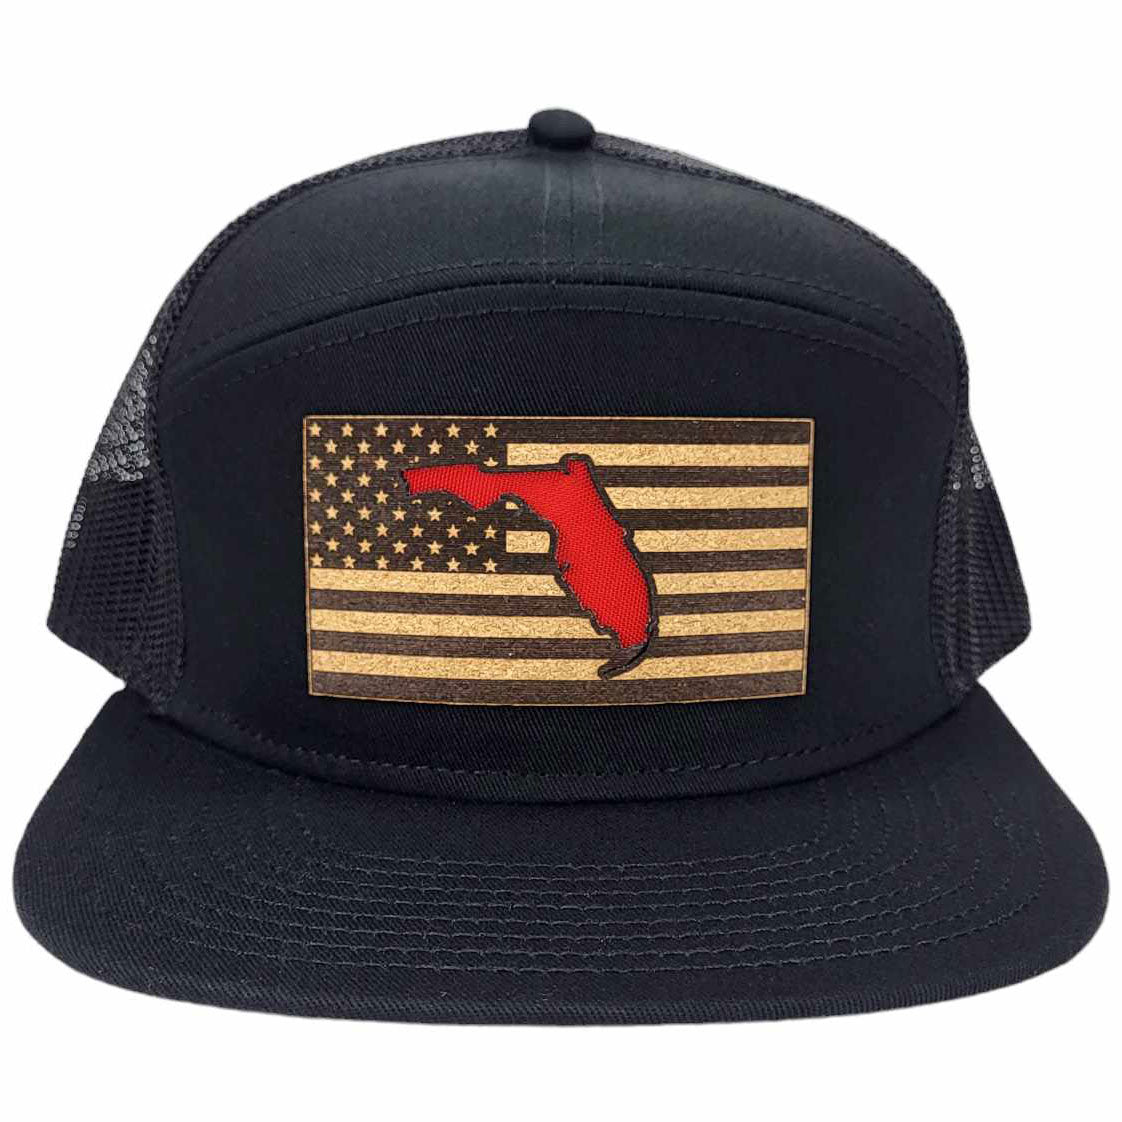 The Floridian Hat